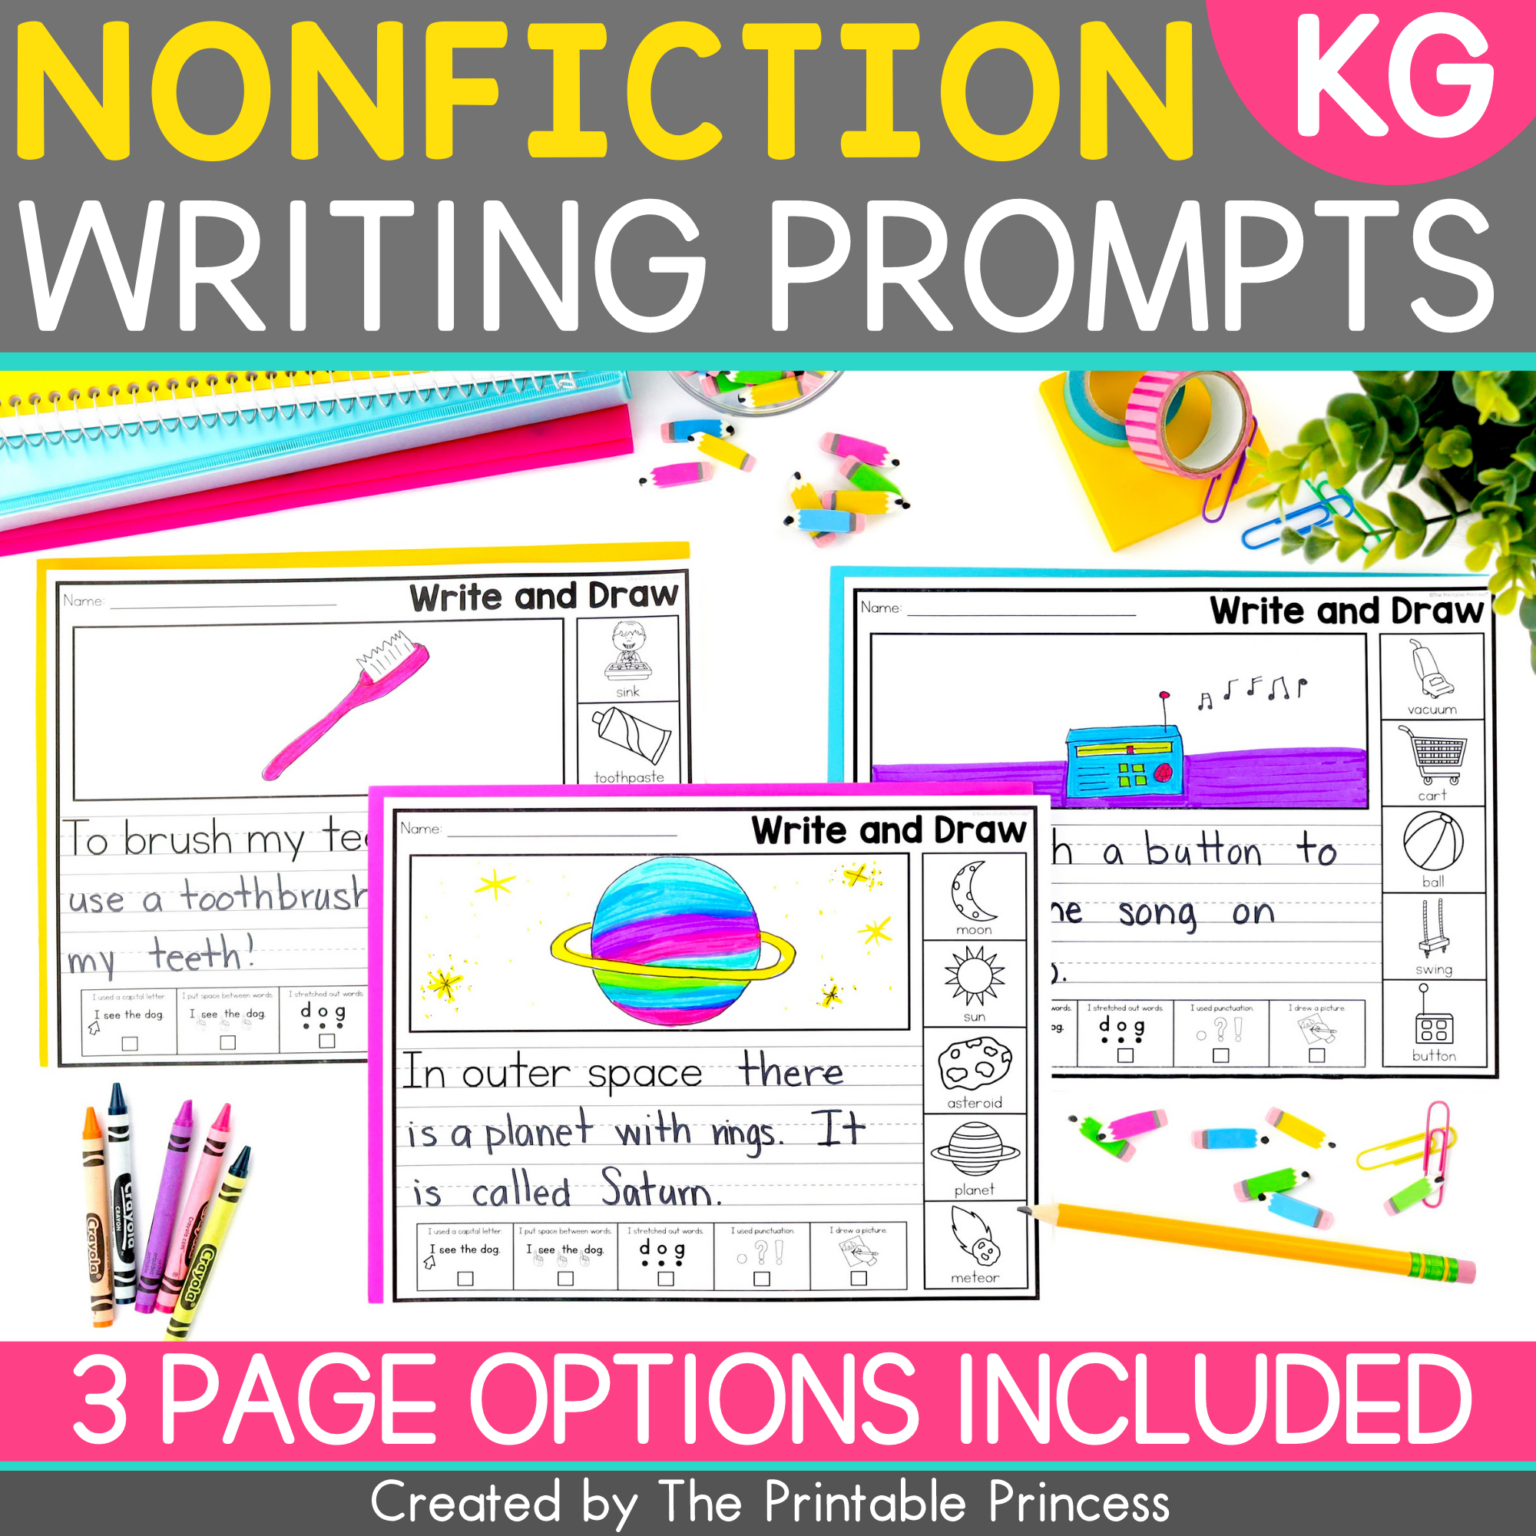 Non-Fiction Writing Prompts for Kindergarten - The Printable Princess